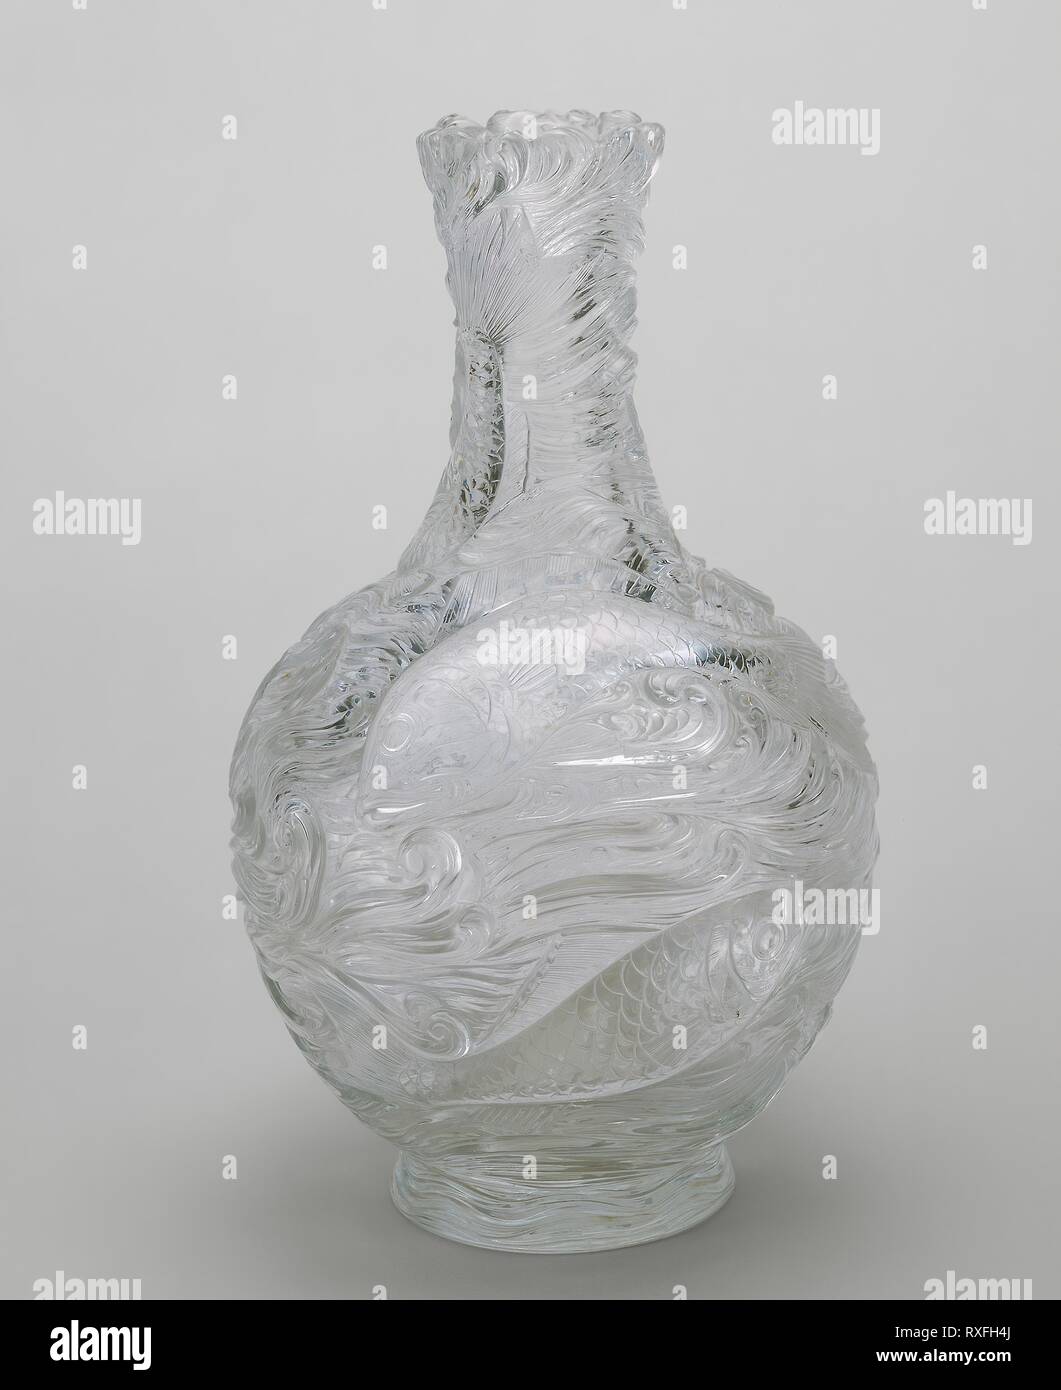 Rock Crystal Vase High Resolution Stock Photography and Images - Alamy